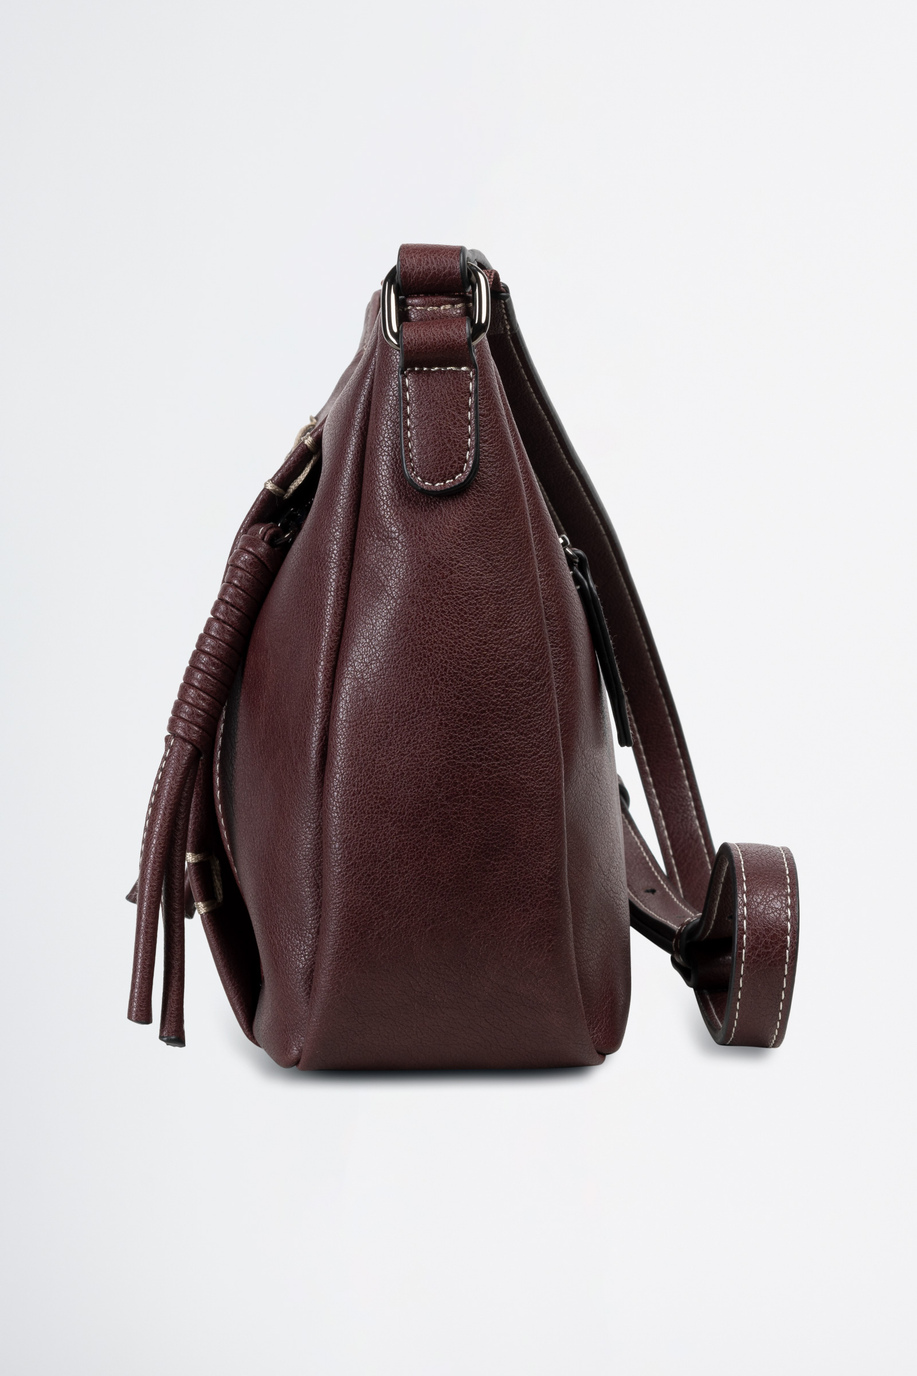 Smooth PU synthetic fabric shoulder bag - Accessories for her | La Martina - Official Online Shop